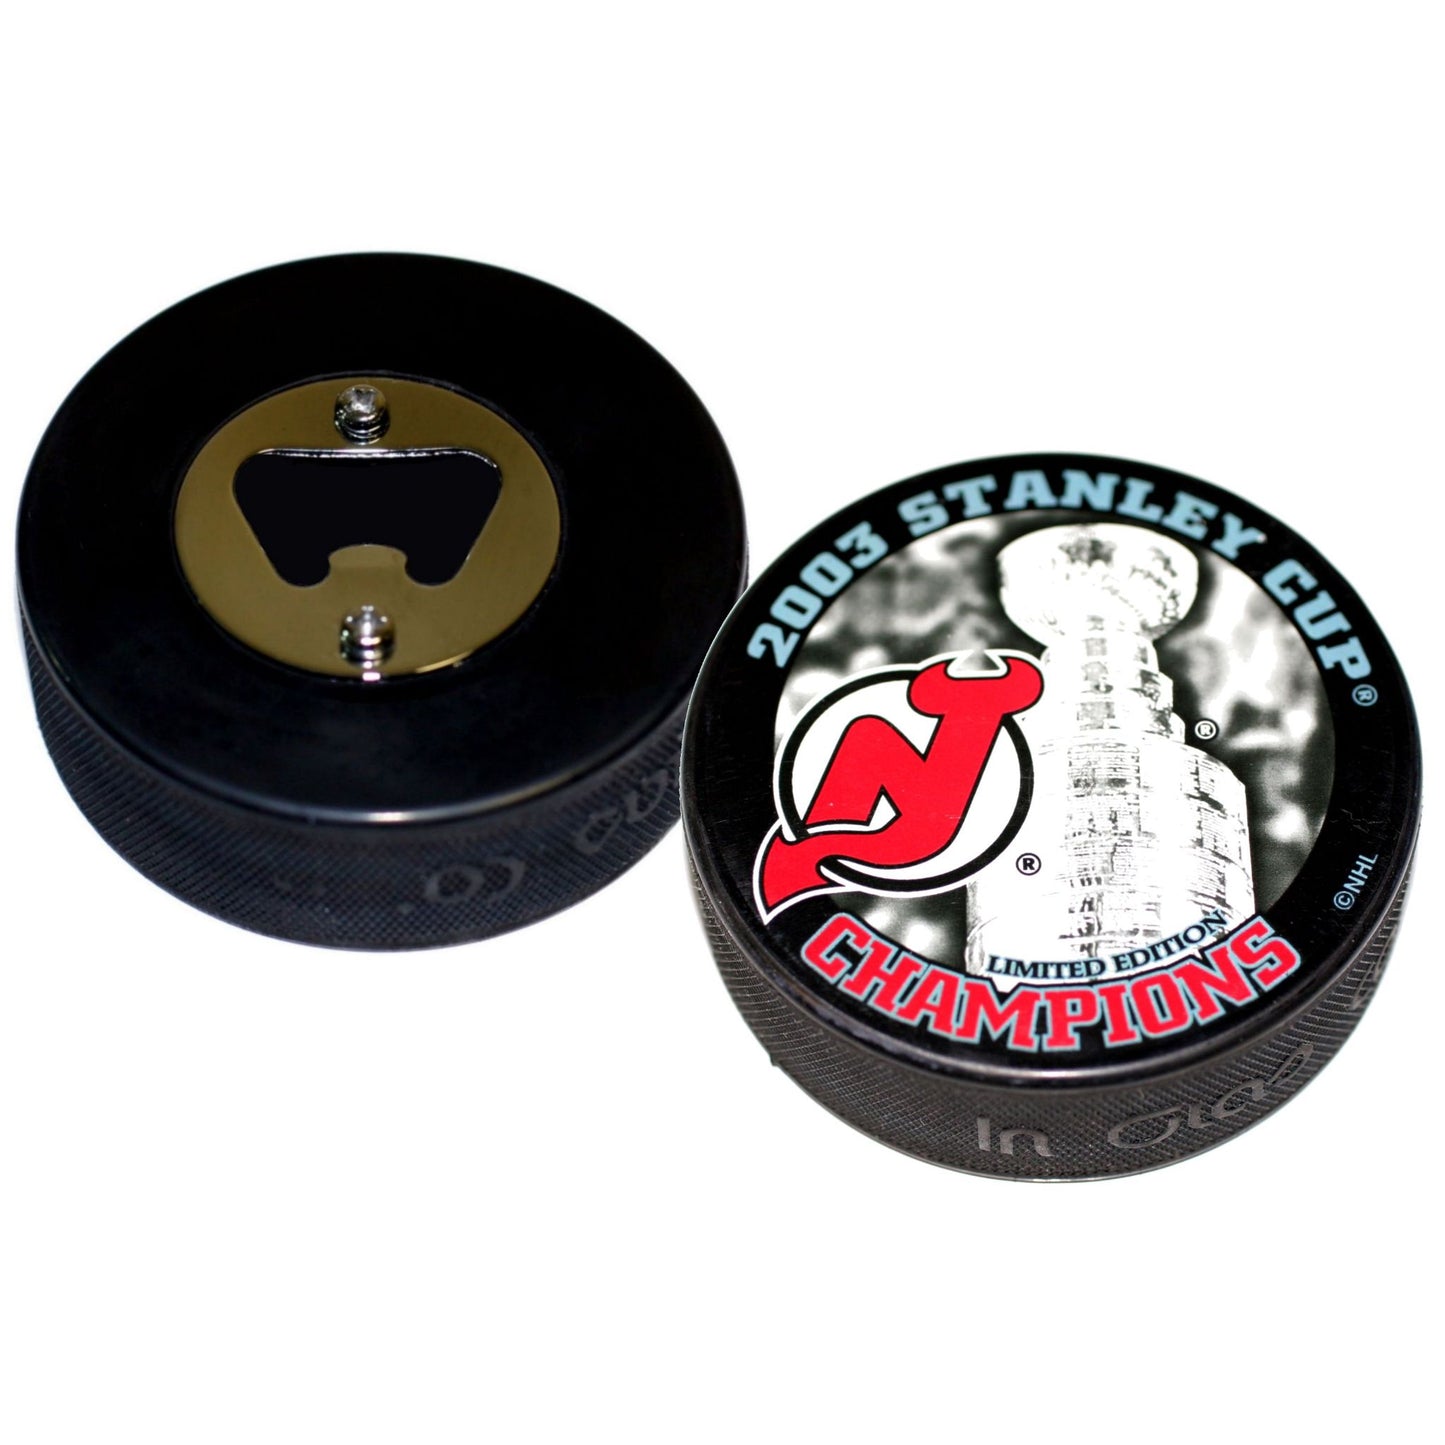 New Jersey Devils 2003 Stanley Cup Champions Hockey Puck Bottle Opener